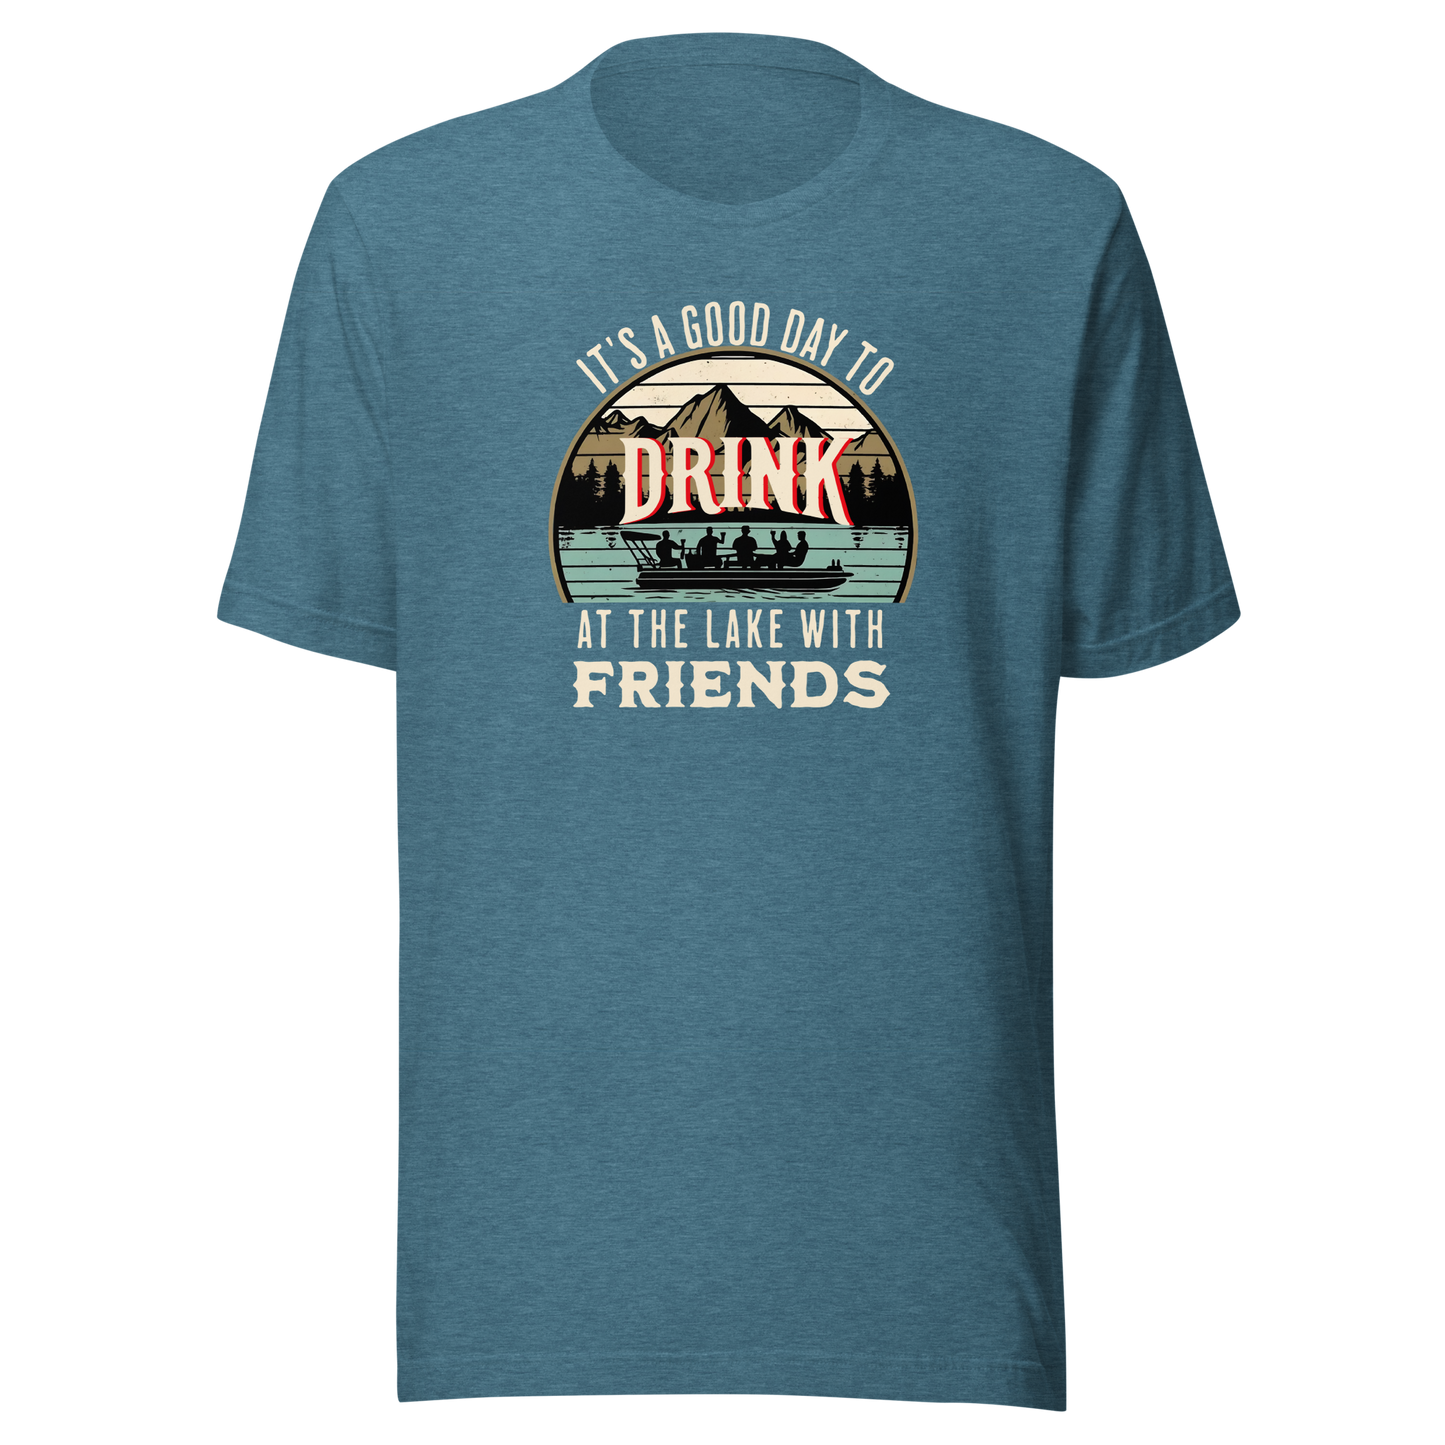 Tee with "It's a Good Day to Drink at the Lake with Friends," showing people drinking on a boat, with lake and mountain views.